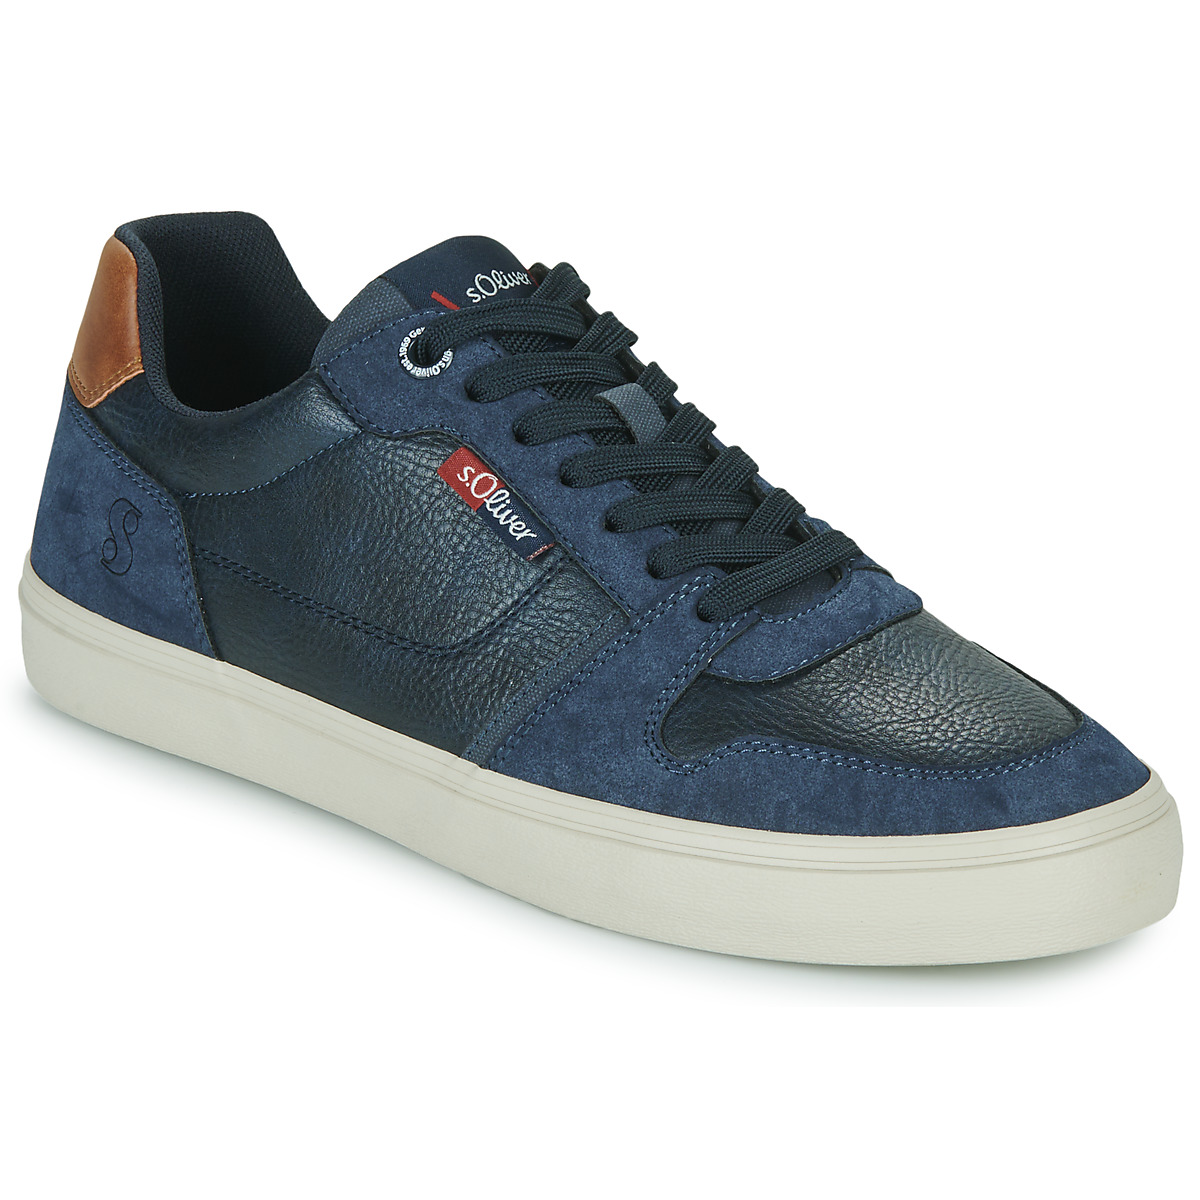 Xαμηλά Sneakers S.Oliver 13602-41-891